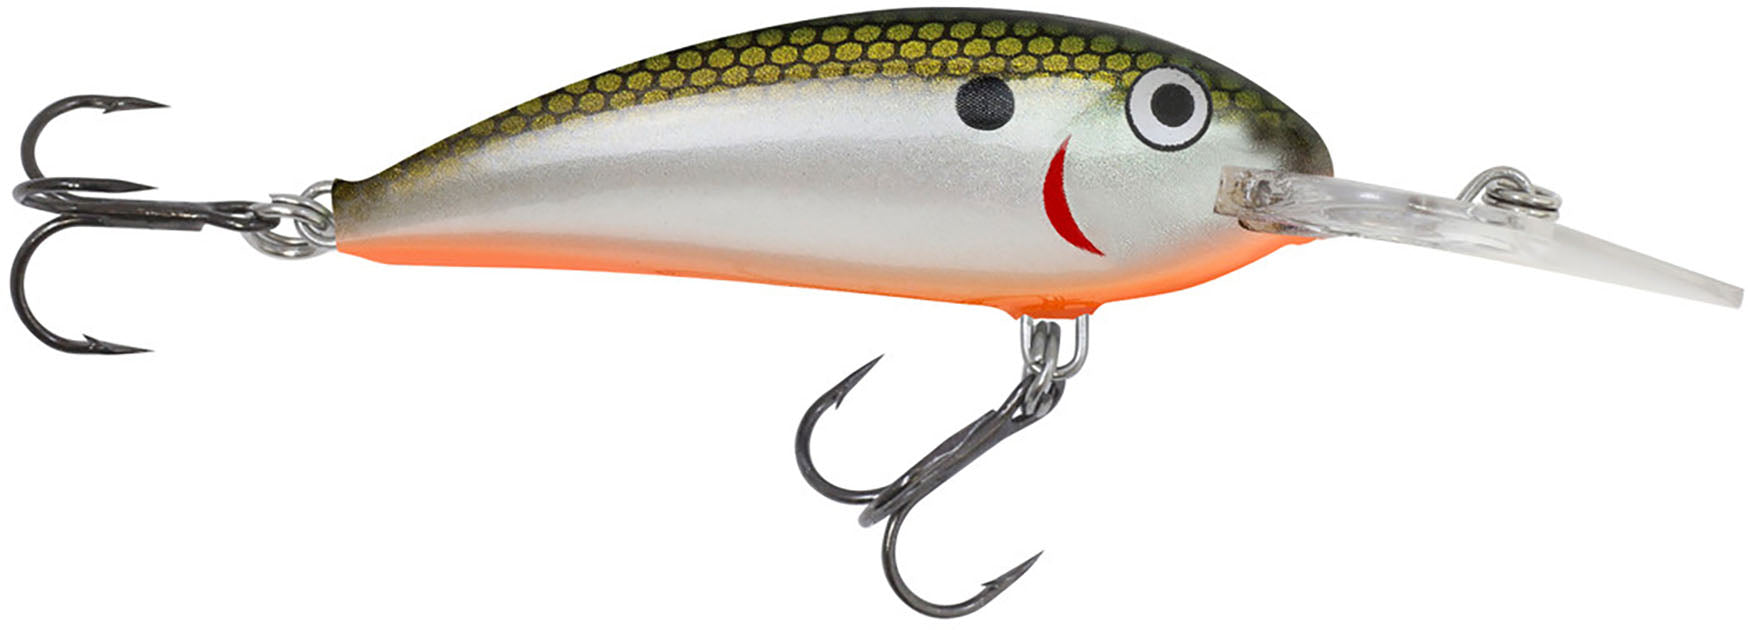 Northland Tackle Rumble Shad - 5 - Tennessee Shad Orange Belly